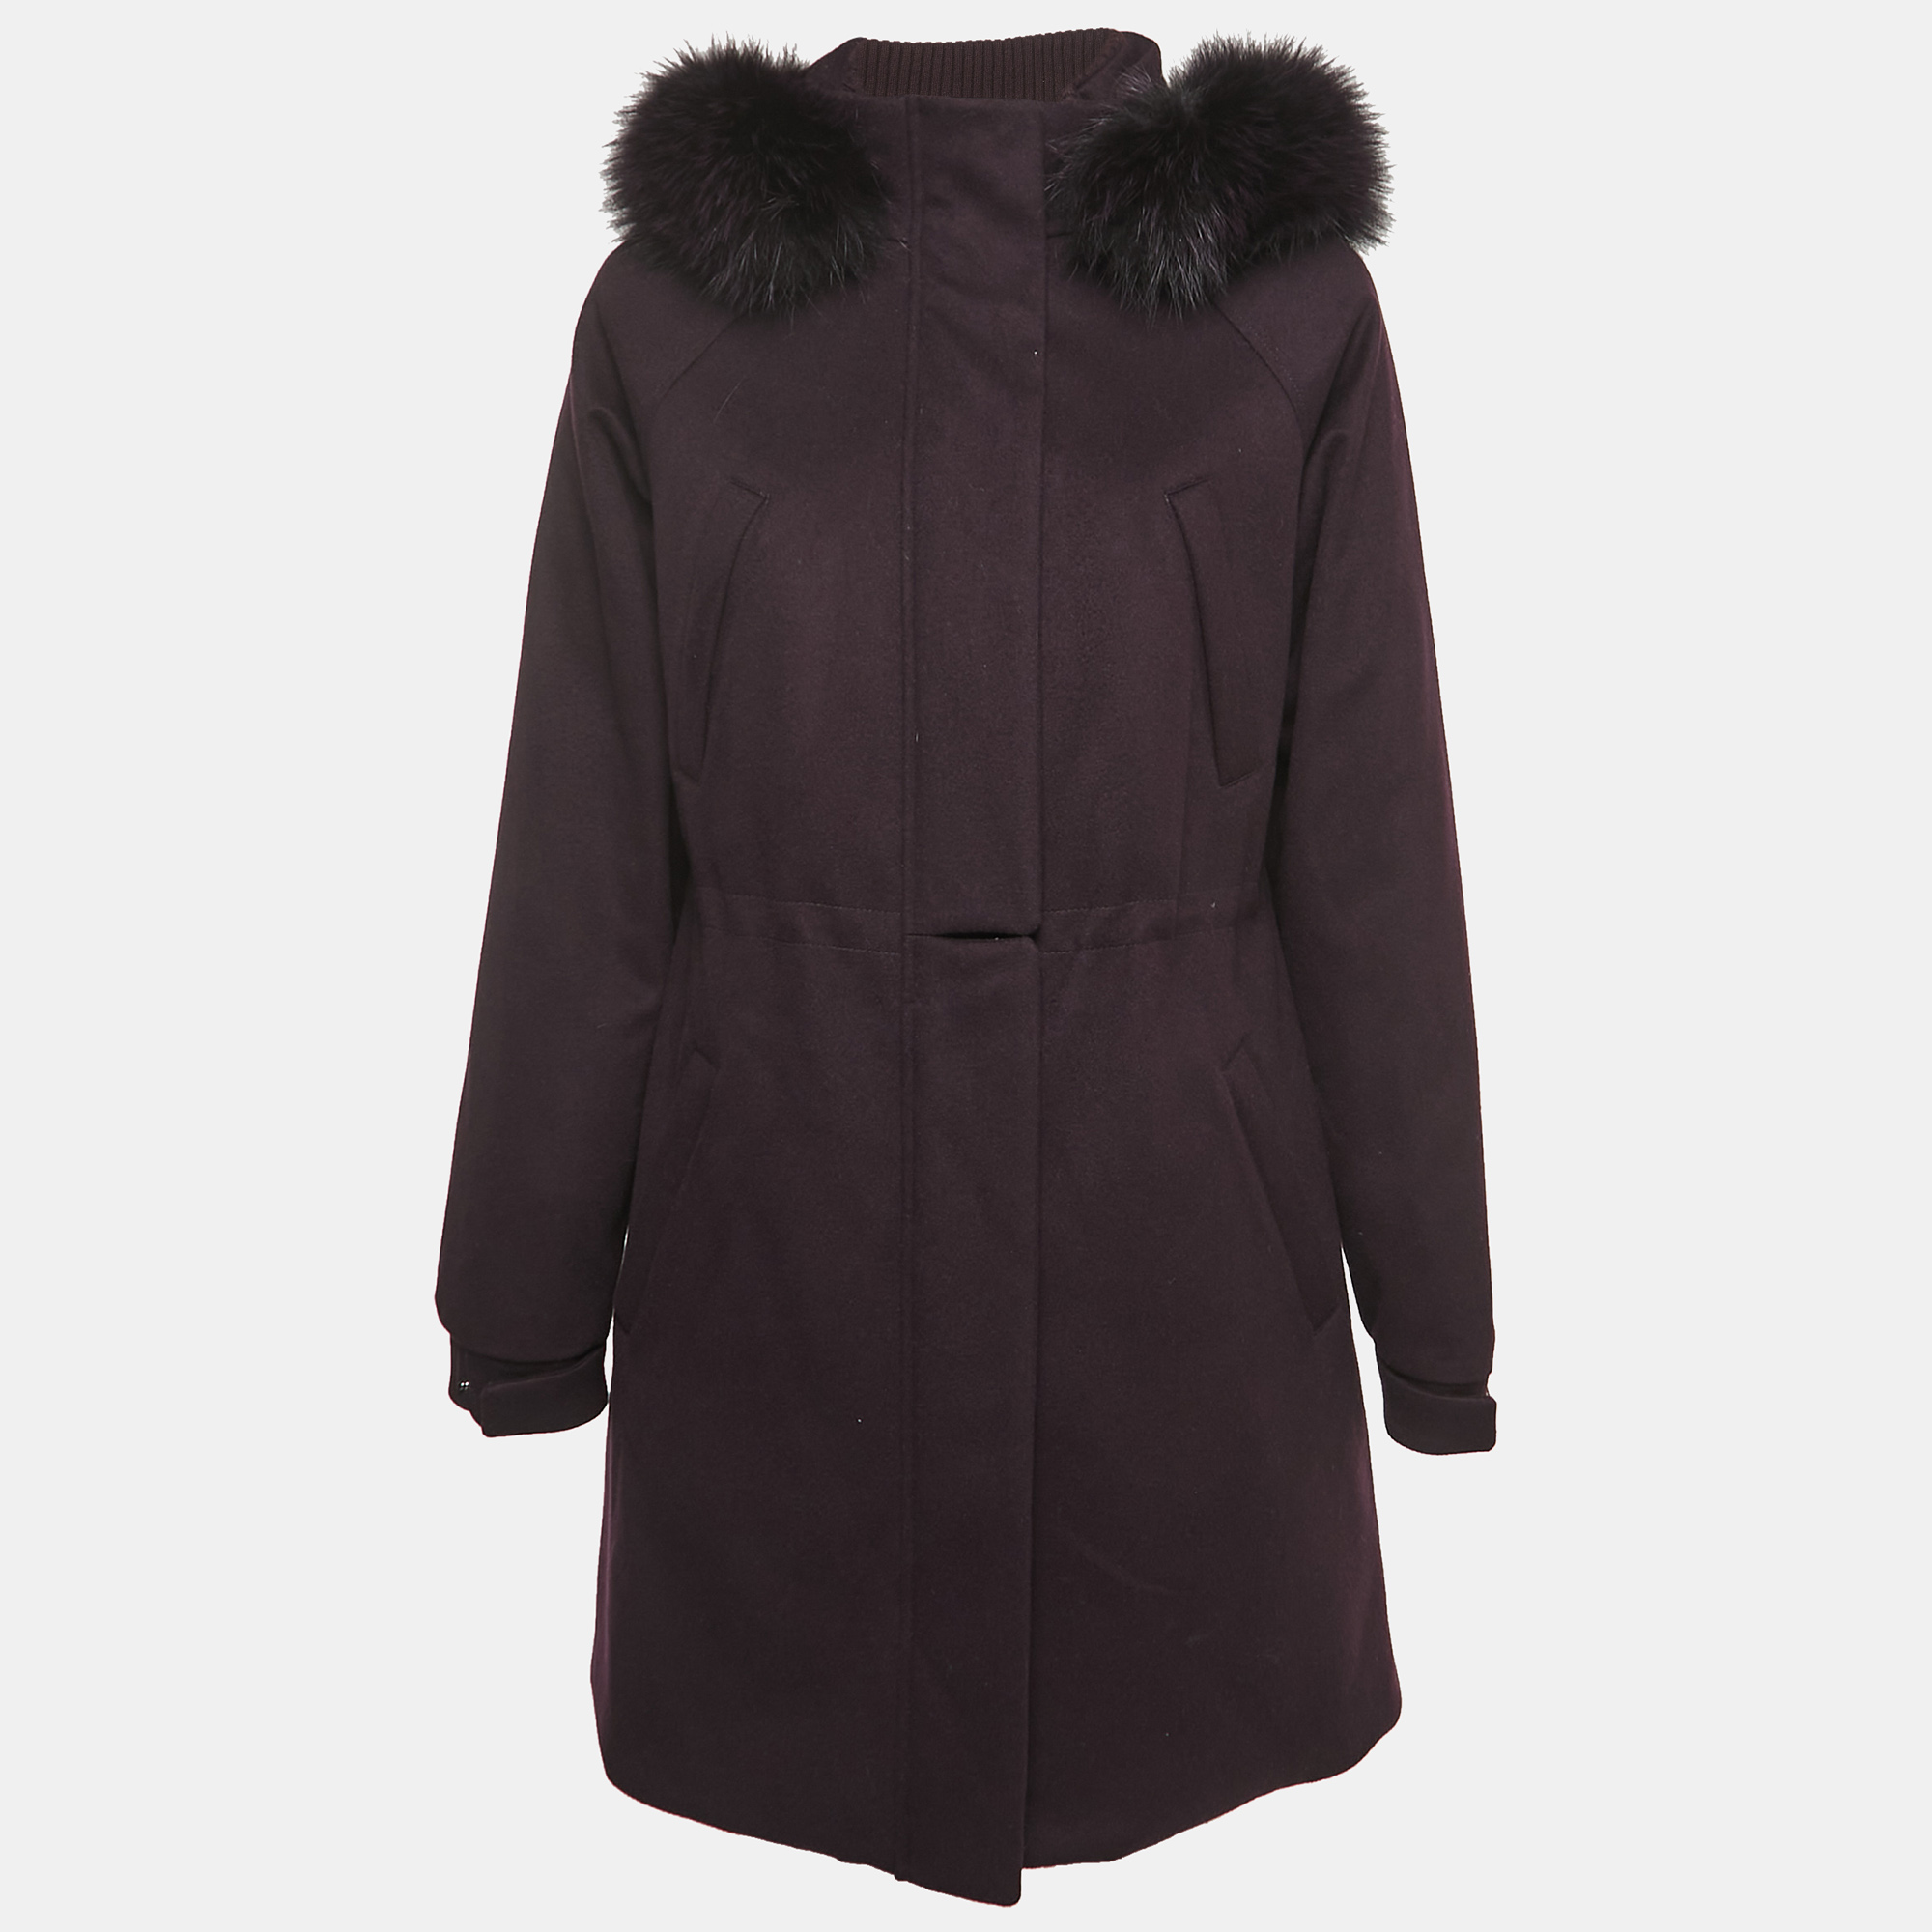 cashmere coat for women